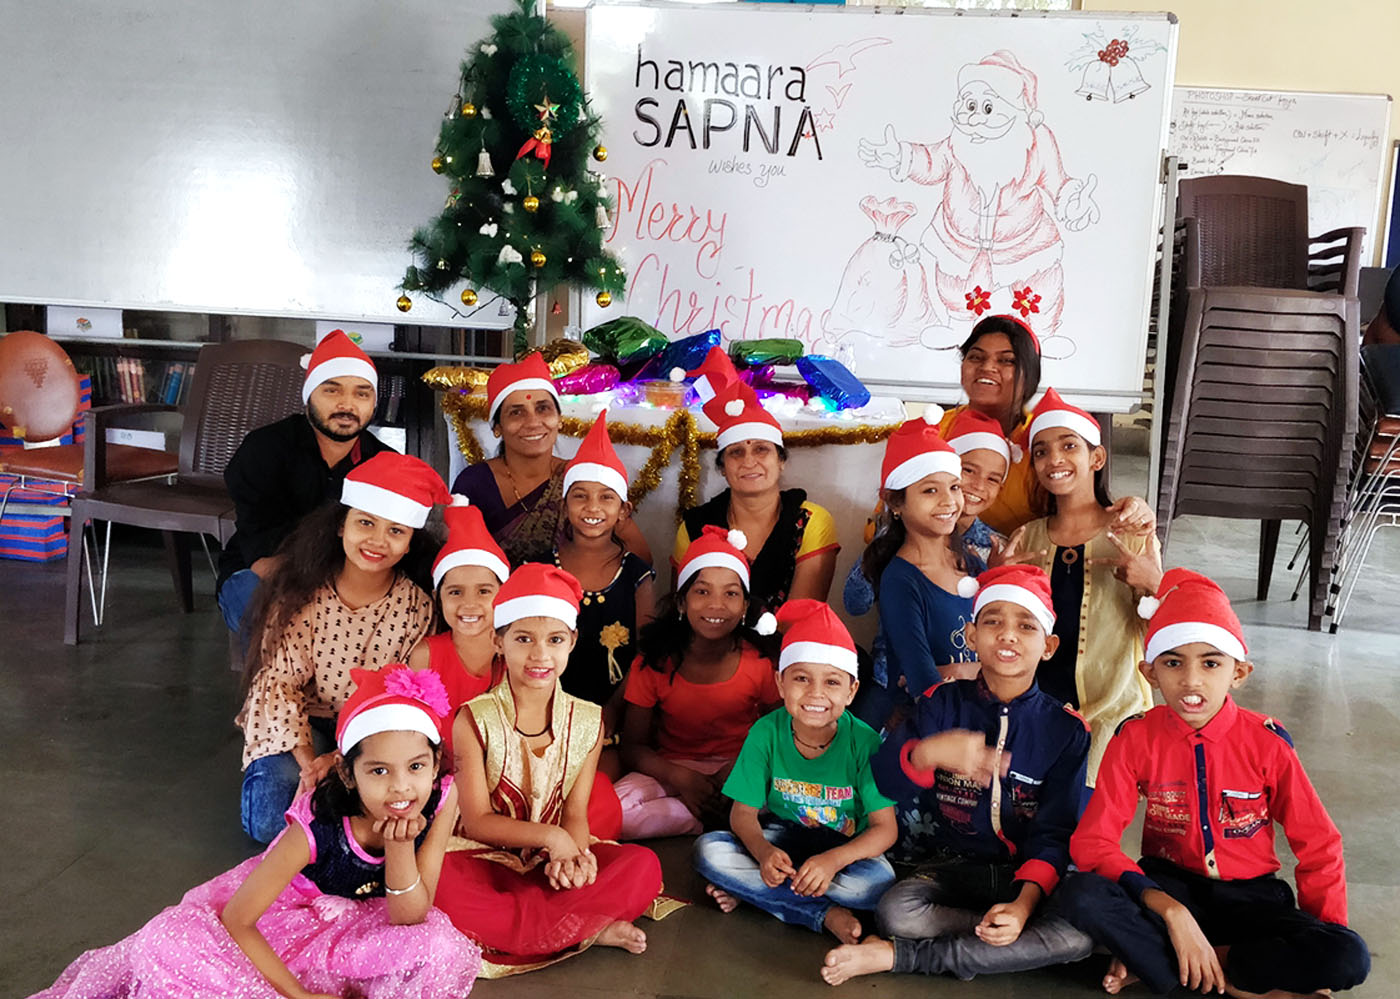 Merry Christmas from the children of the morning batch and staff of Hamaara Sapna